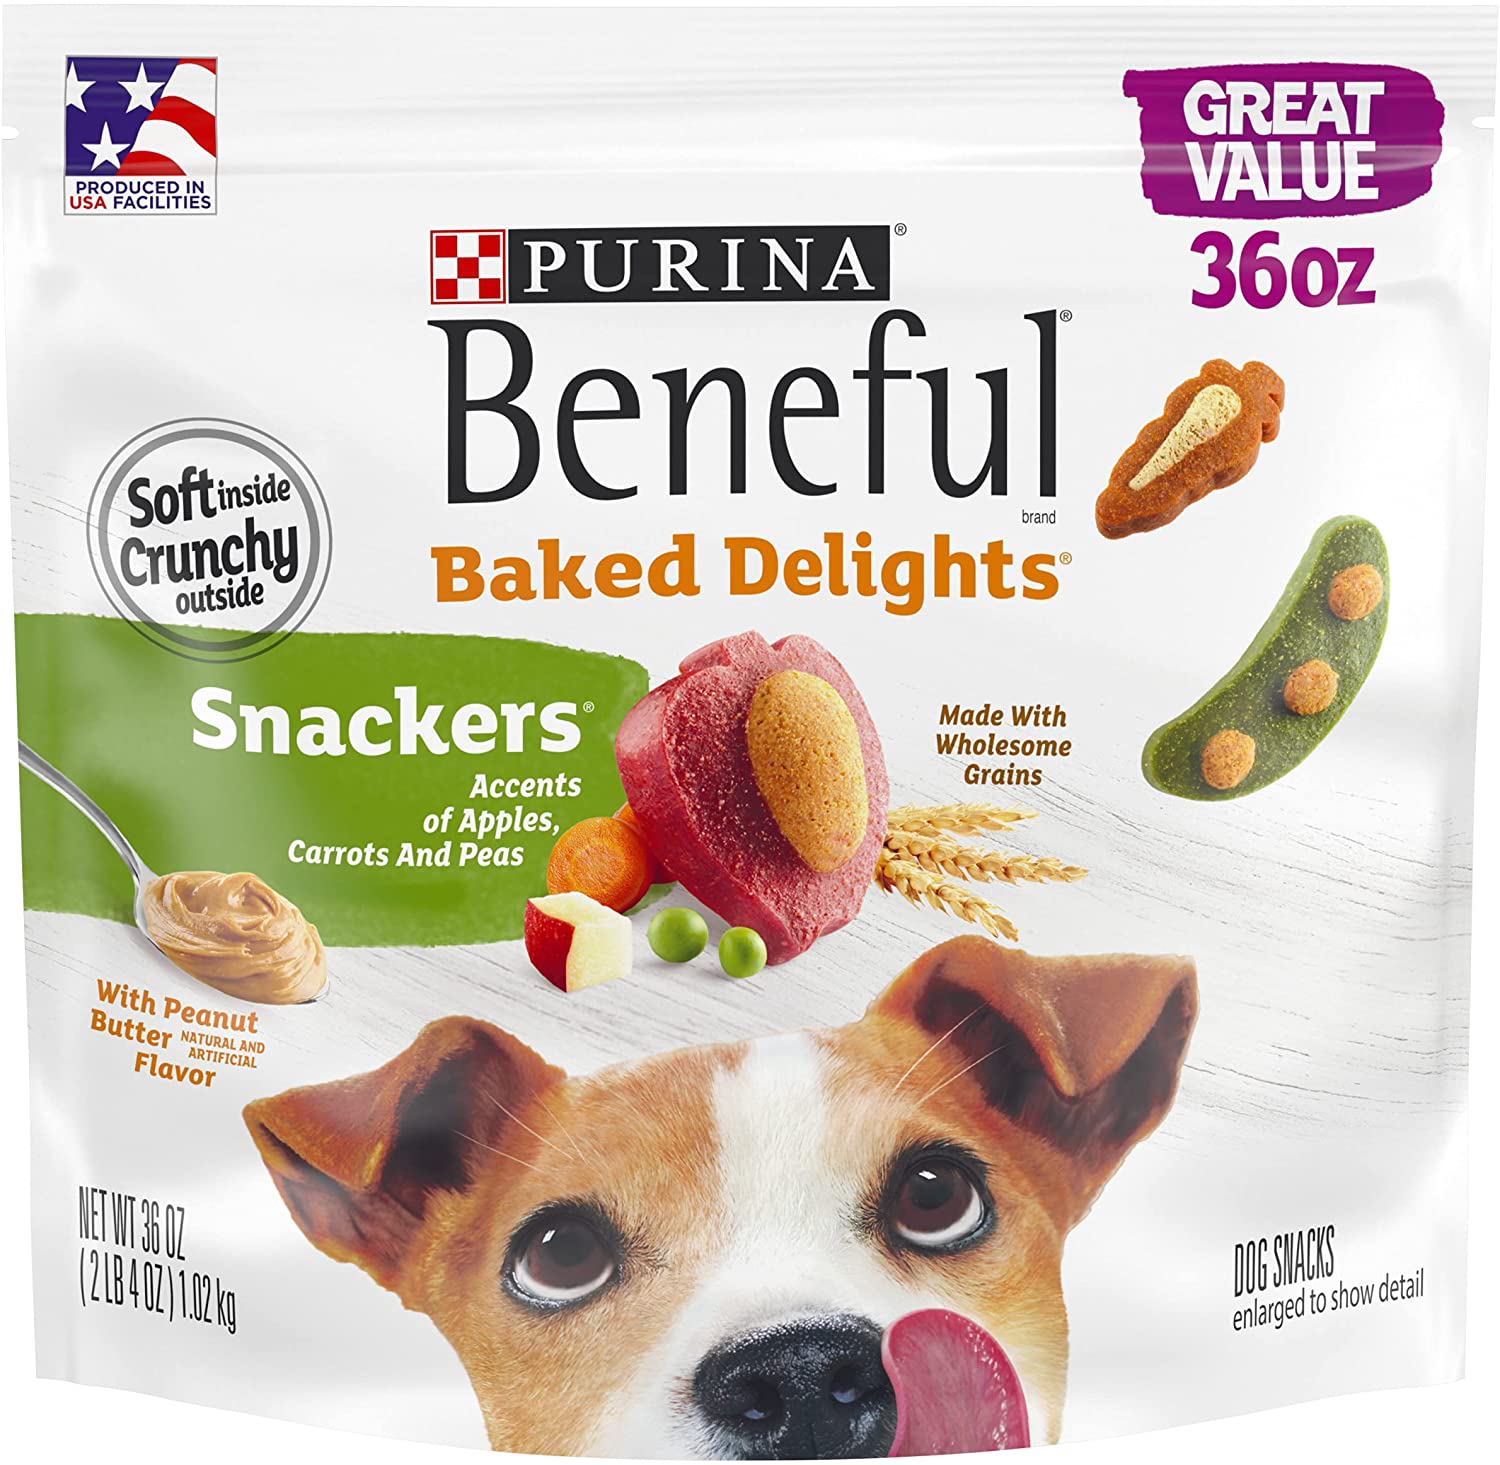 Purina Beneful Made in USA Facilities Dog Training Treats, Baked Delights Snackers - 36 Oz. Pouch Animals & Pet Supplies > Pet Supplies > Dog Supplies > Dog Treats Nestlé Purina PetCare Company   